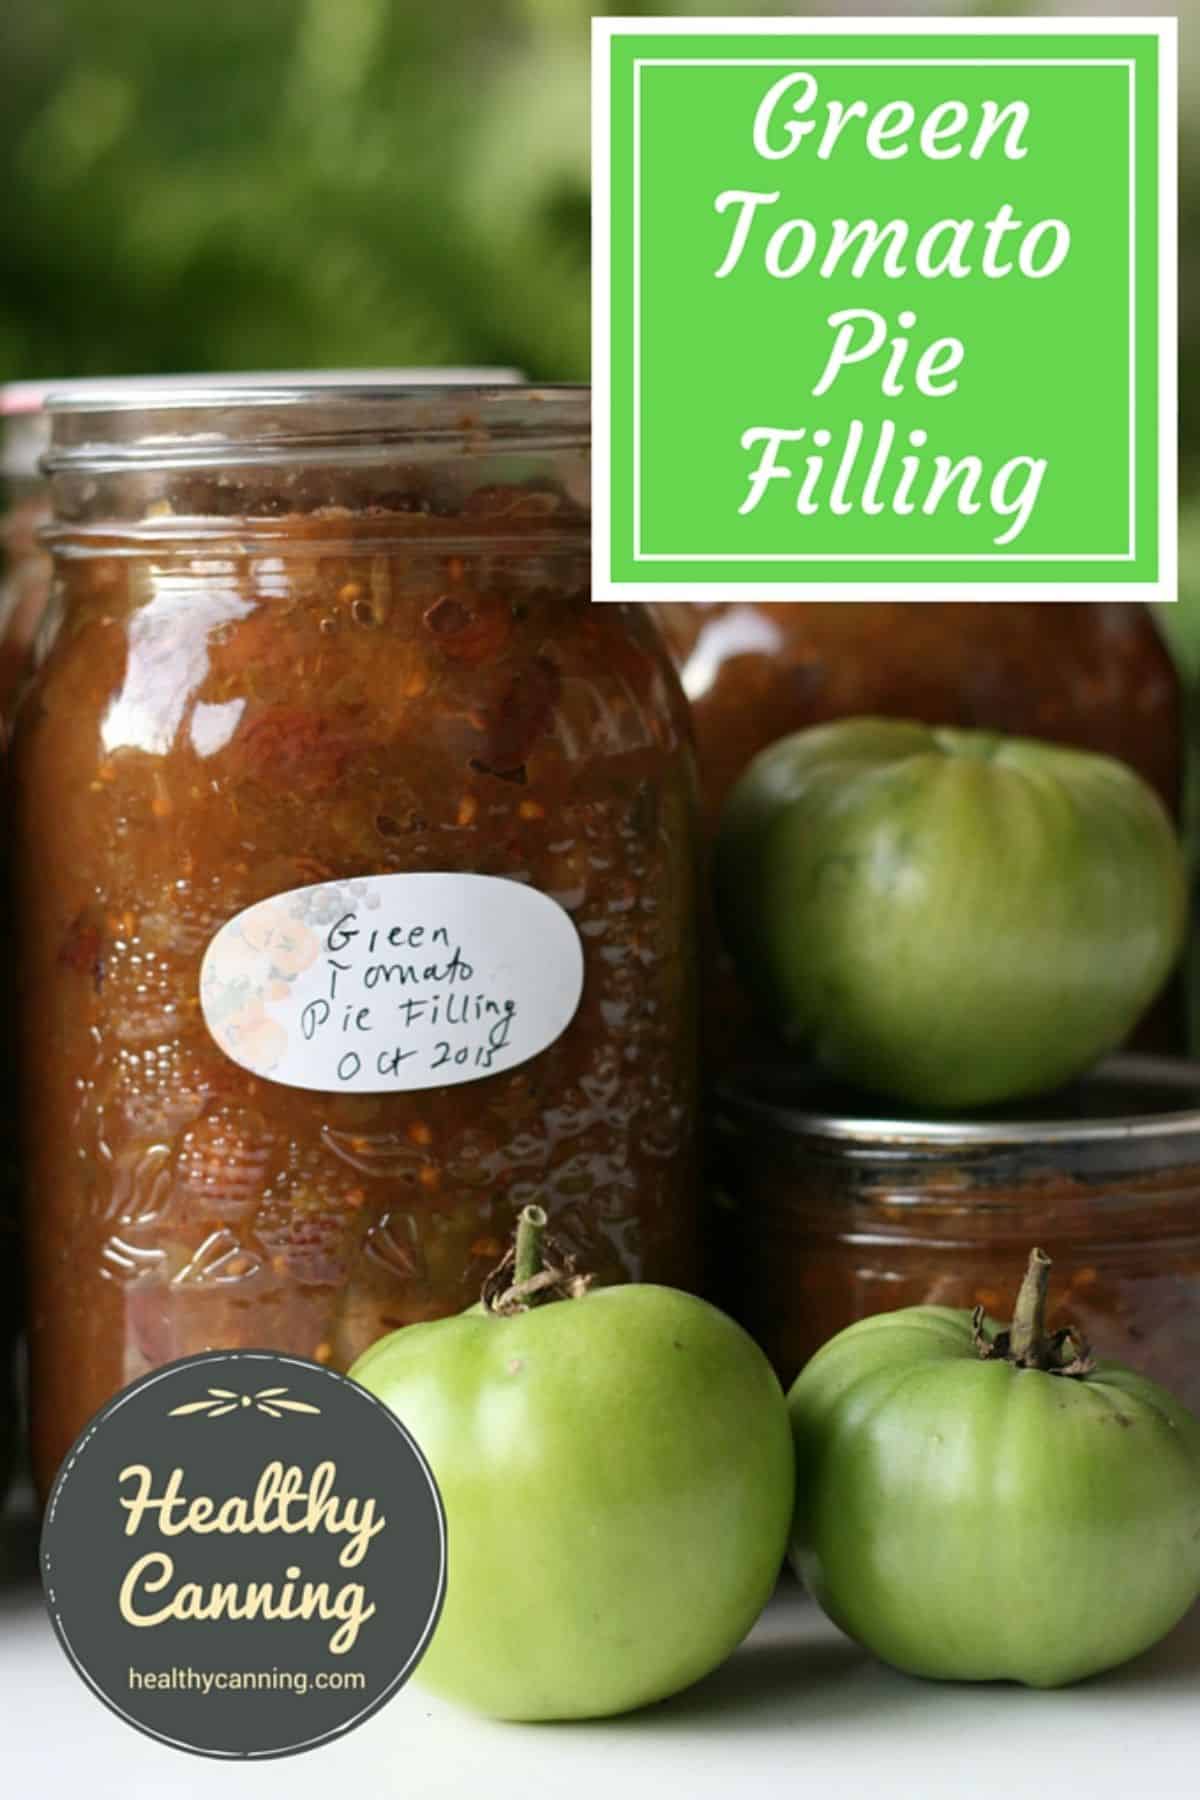 Tomato pie filling canned in glass jars.